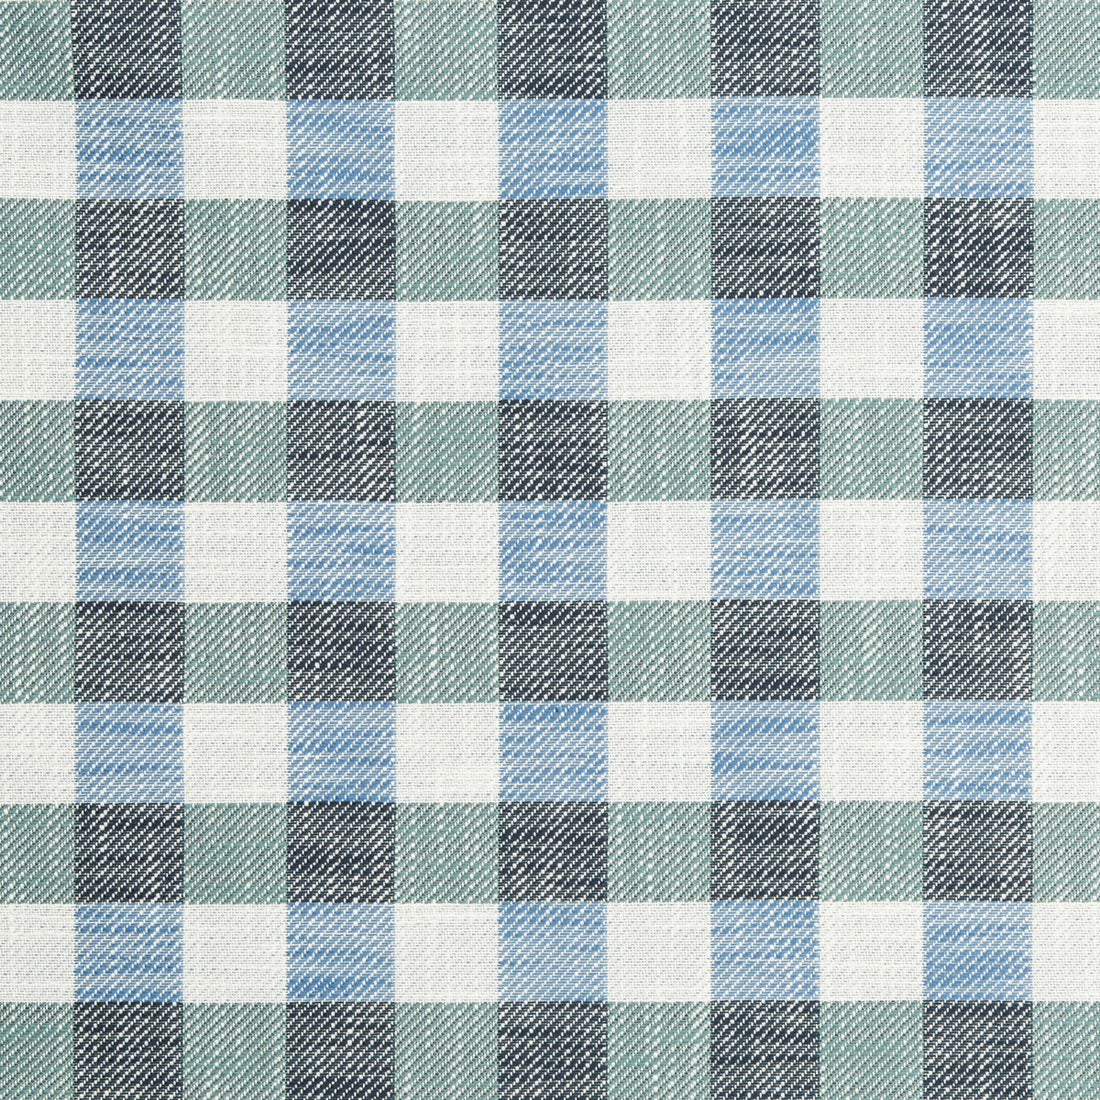 Kf Ctr fabric - pattern 35884.5.0 - by Kravet Contract in the Gis Crypton collection